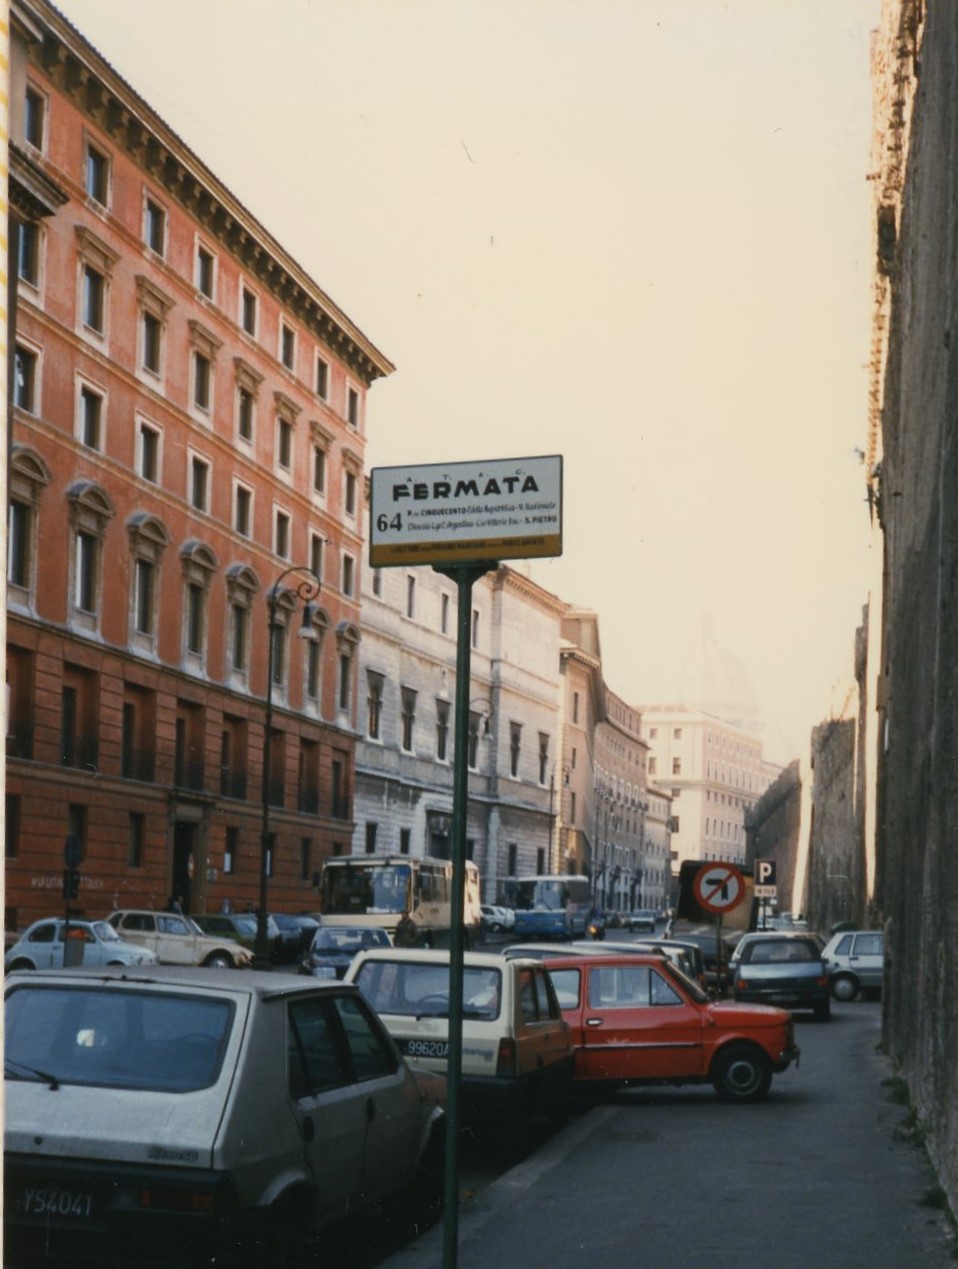 An example of the erratic parking techniques in Rome.